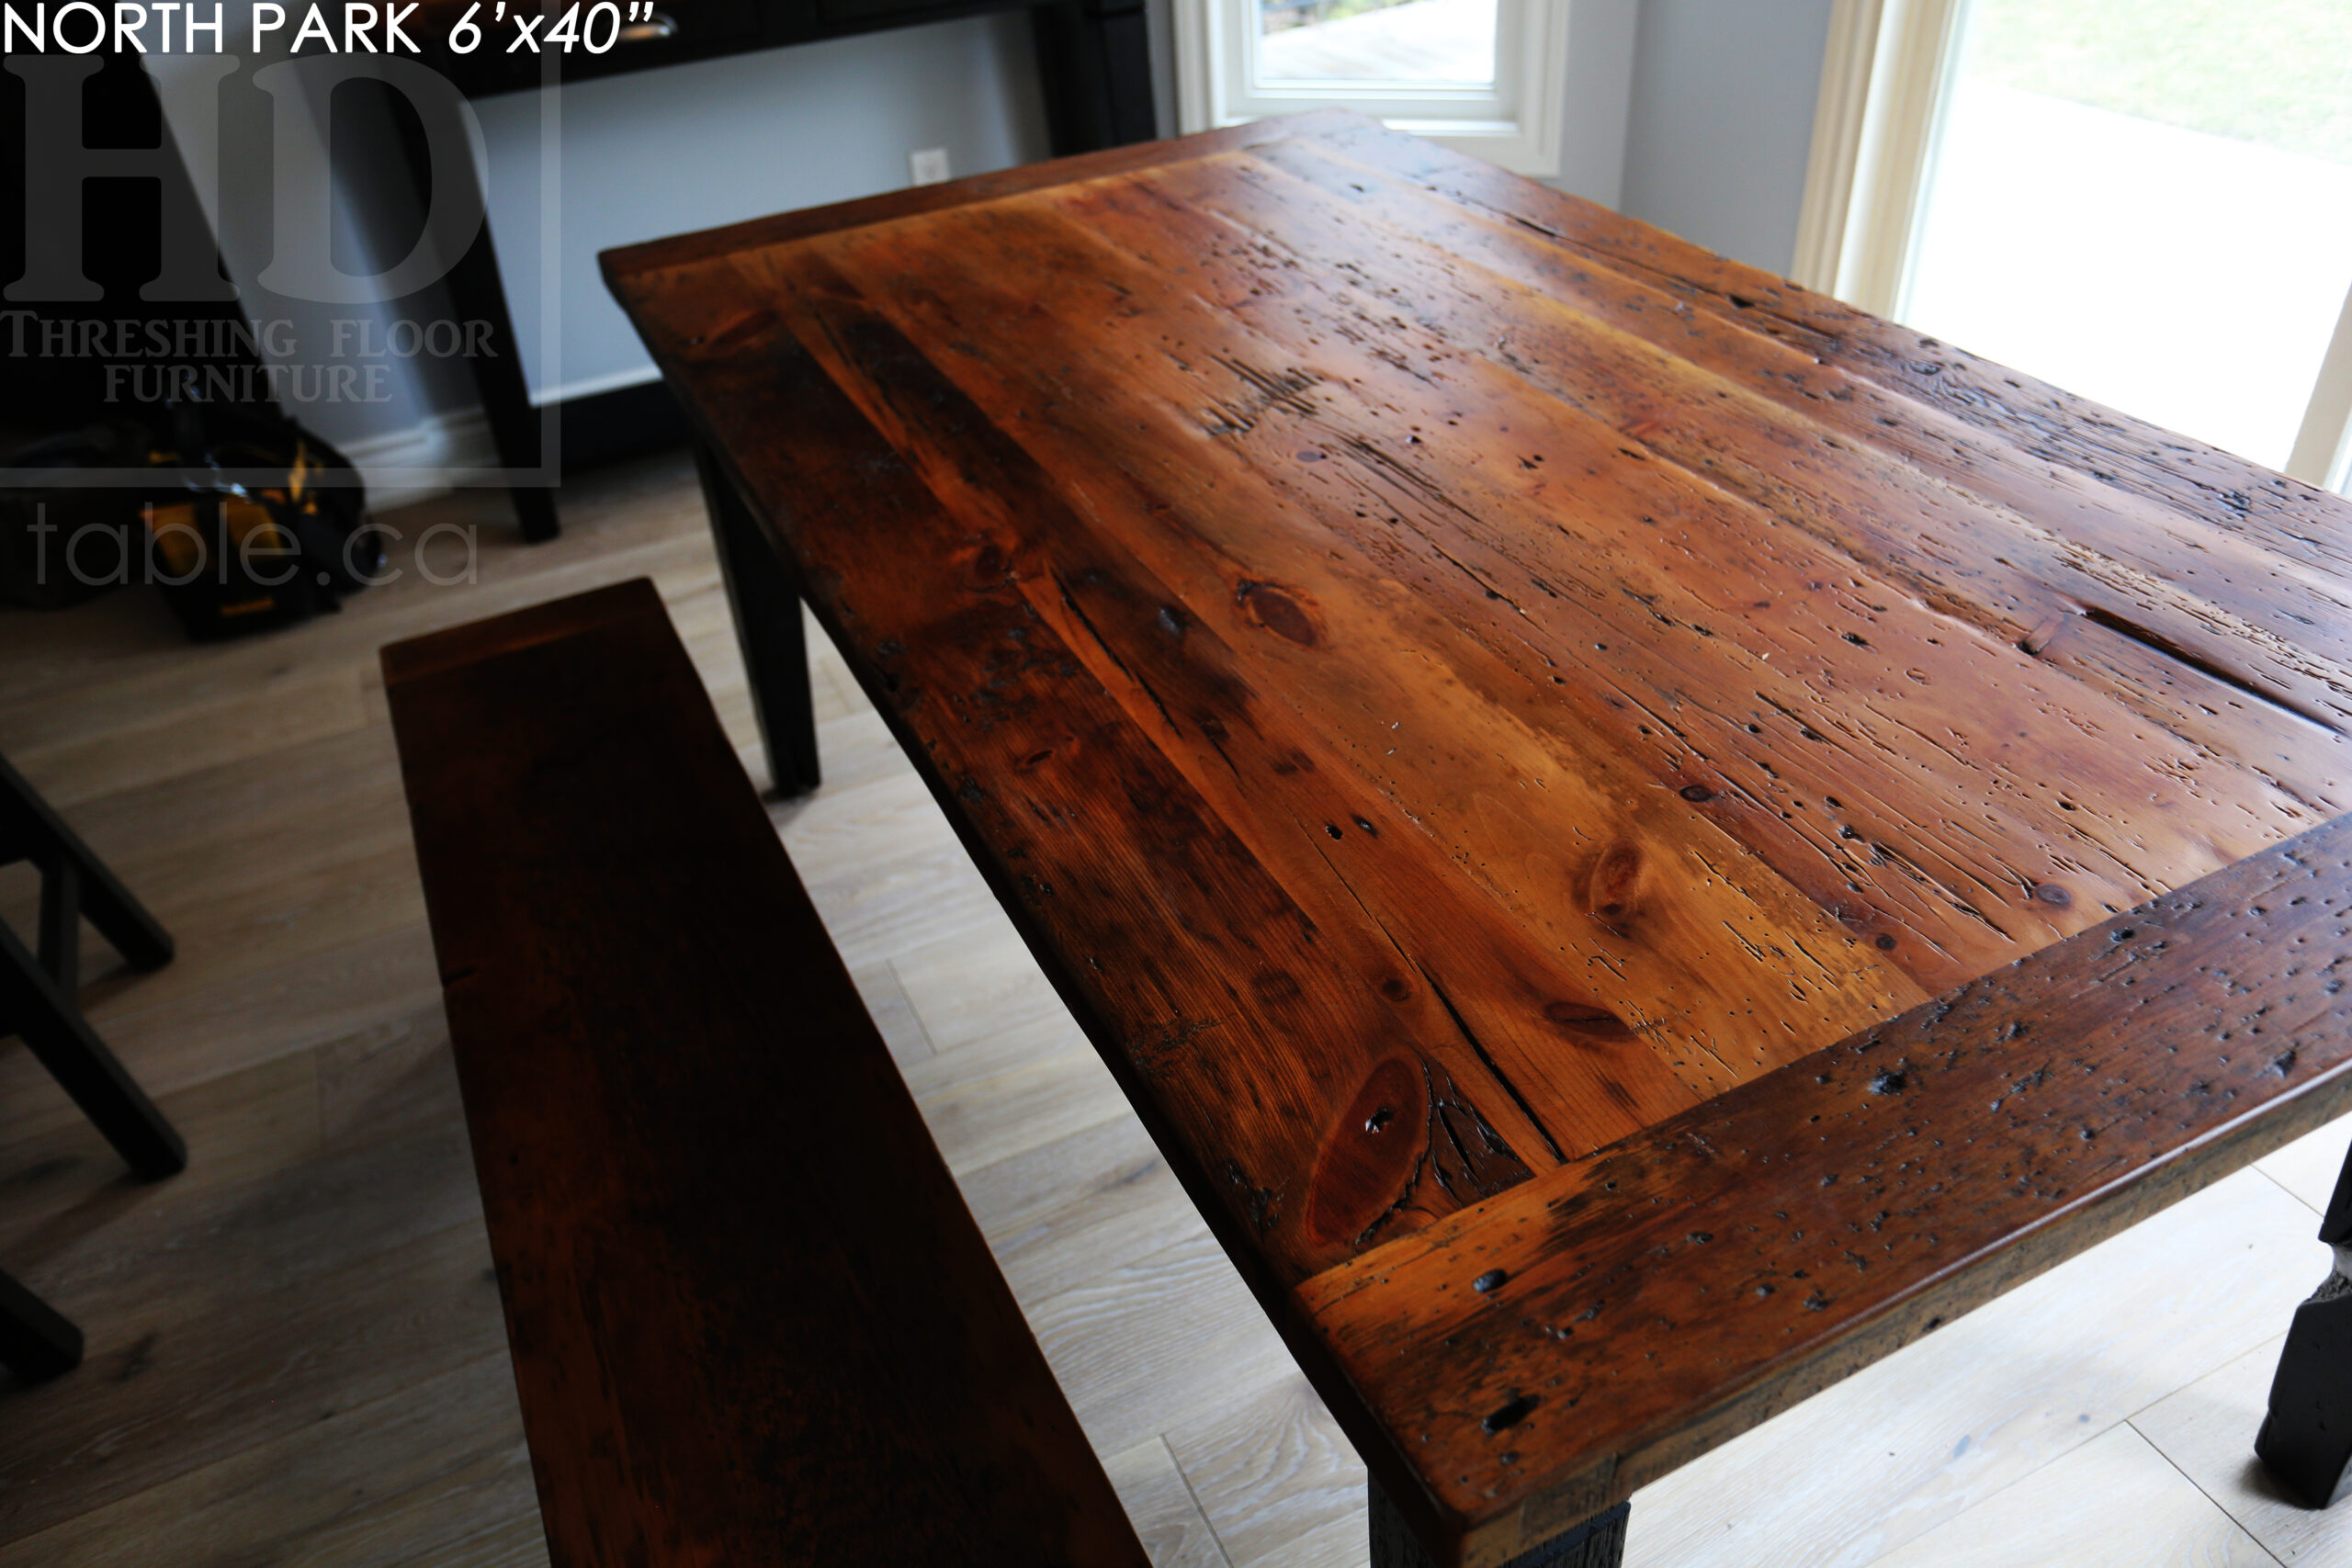 6' Reclaimed Wood Harvest Table for a Mississauga, Ontario Home - 40" wide - Reclaimed Hemlock Threshing Floor Construction- Tapered with a Notch Windbrace Beam Legs - Original Distressing/Character/Edges Maintained - Matte polyurethane finish [no epoxy] - Two 12" Leaves - 5' [matching] Bench - www.table.ca